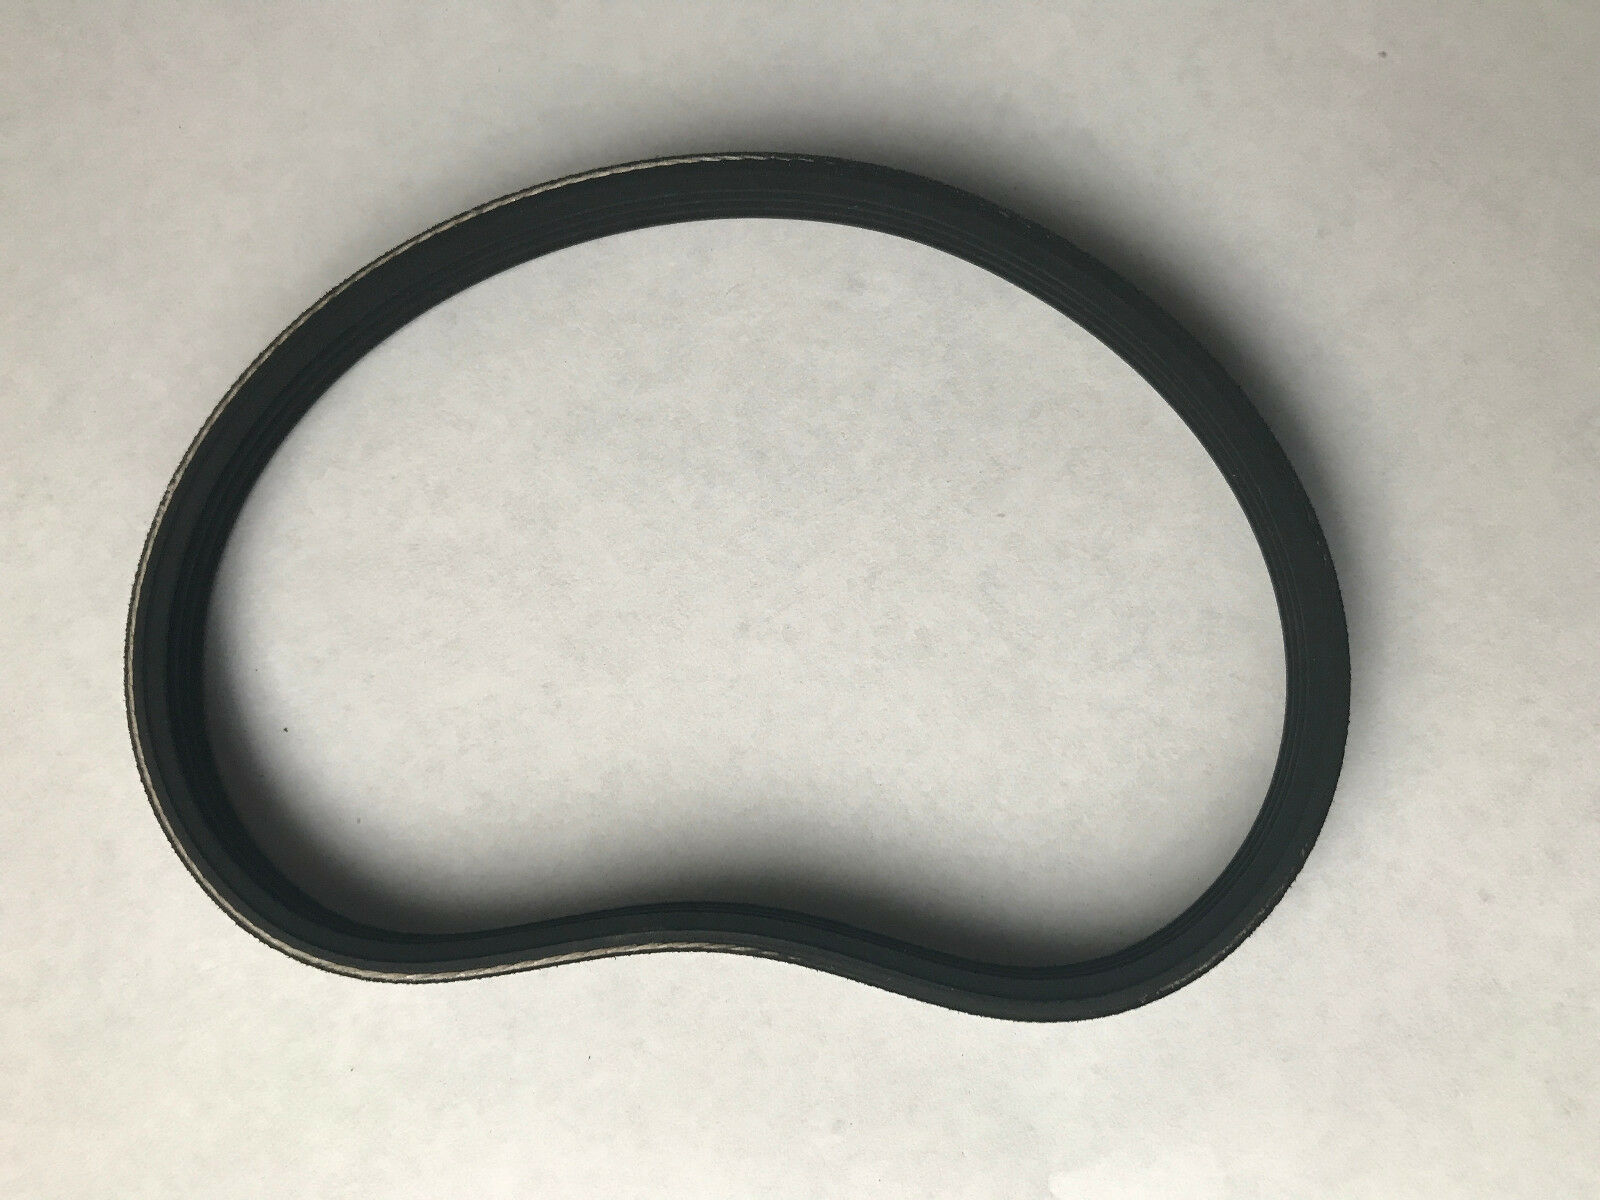 *New Replacement BELT* for use with Shun Ling Meat Slicer OEM# 381126 - $15.83